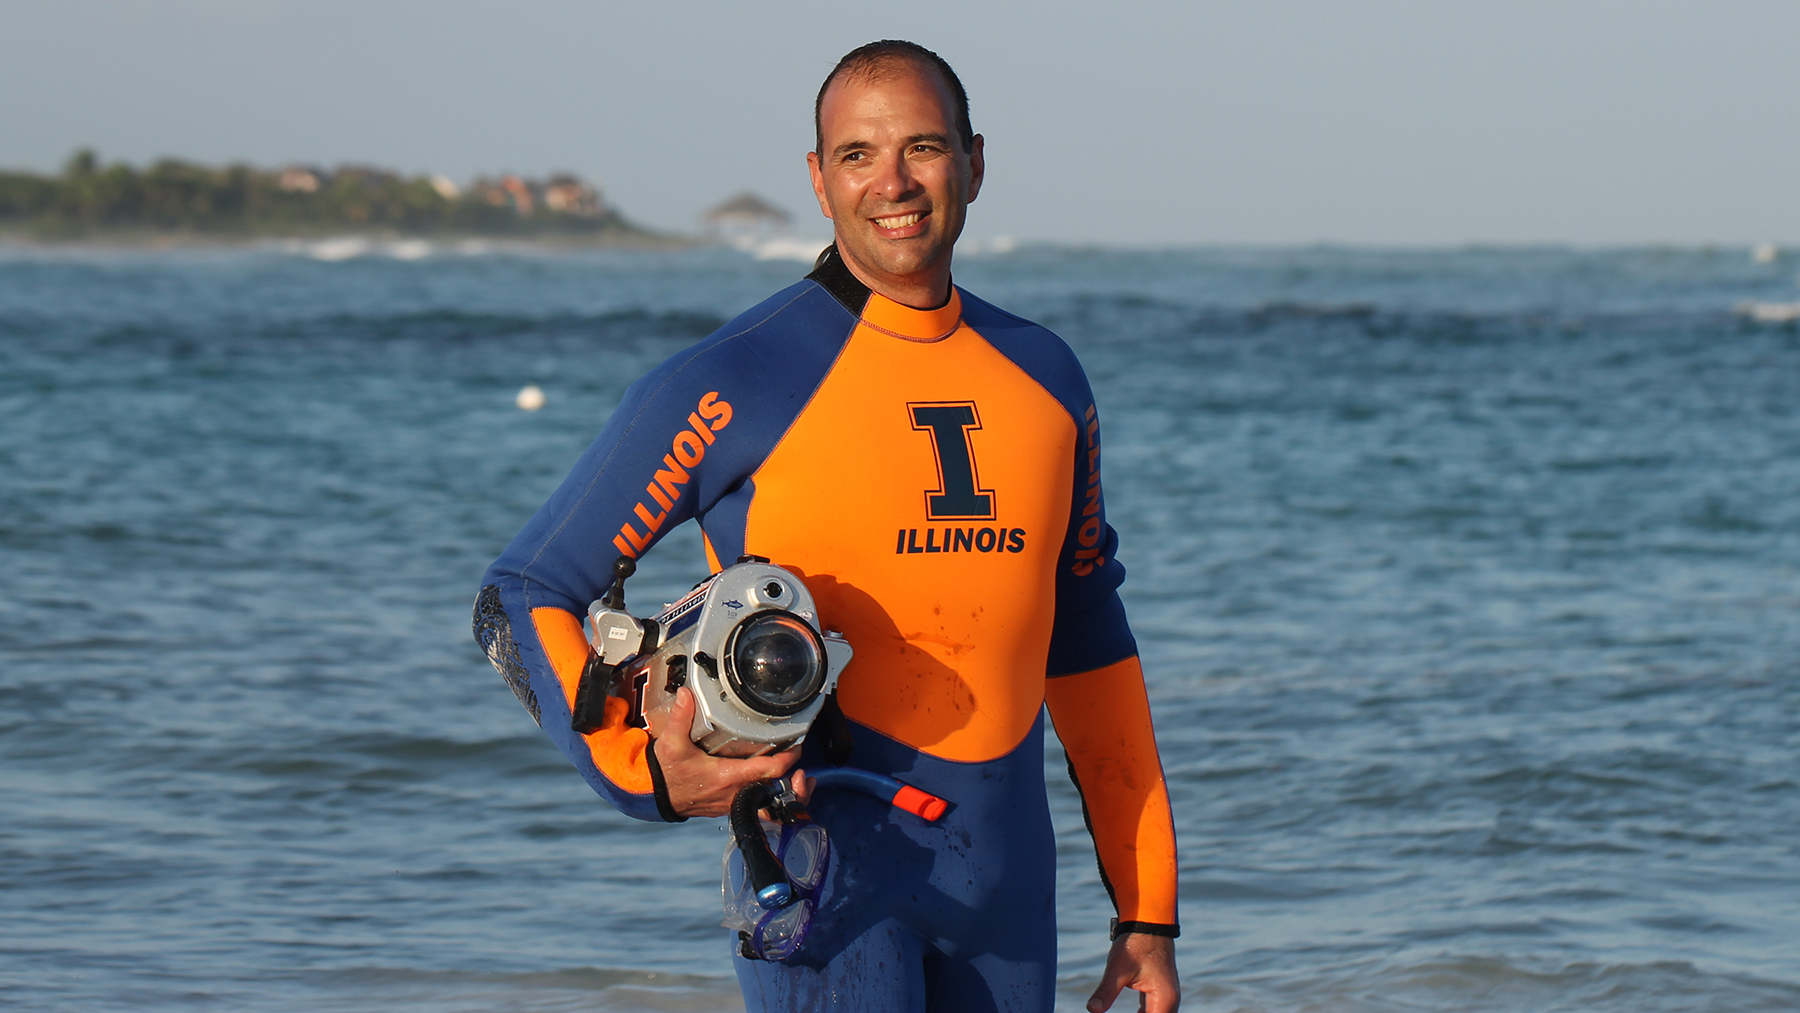 Deep-sea operations pose significant challenges, such as immense pressure, which restrict the availability of suitable technologies for deep-water search missions, said professor Viktor Gruev, who is an expert in underwater geolocation technology.  He is shown hear standing oceanside wearing a wet suit